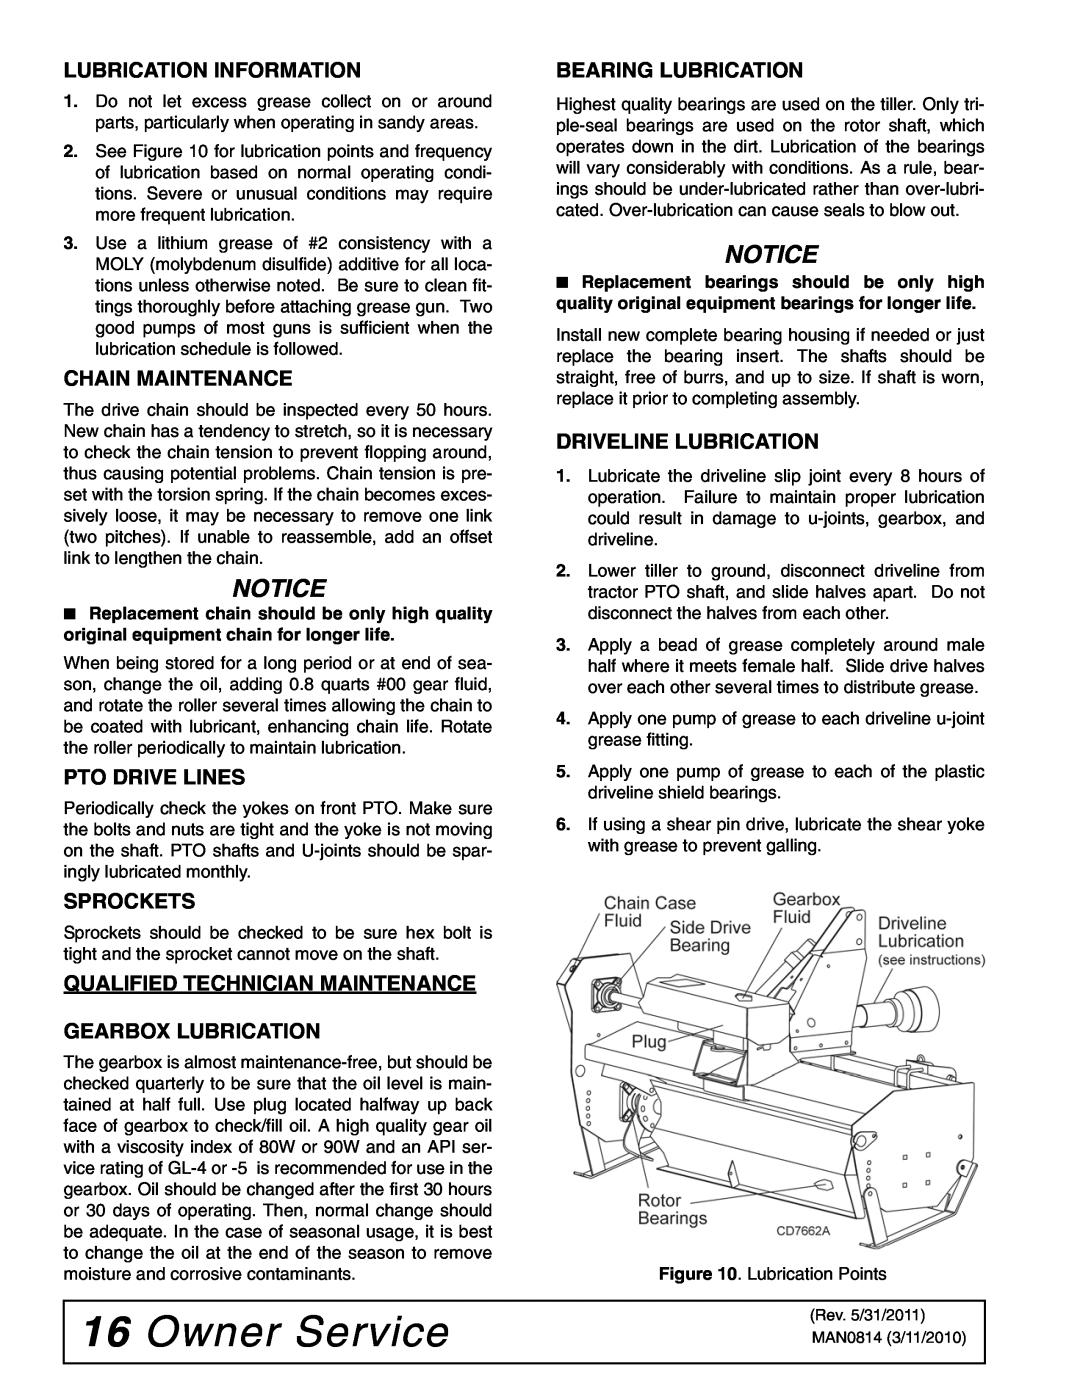 Woods Equipment TS52, TS44 manual Owner Service, Lubrication Information, Chain Maintenance, Pto Drive Lines, Sprockets 